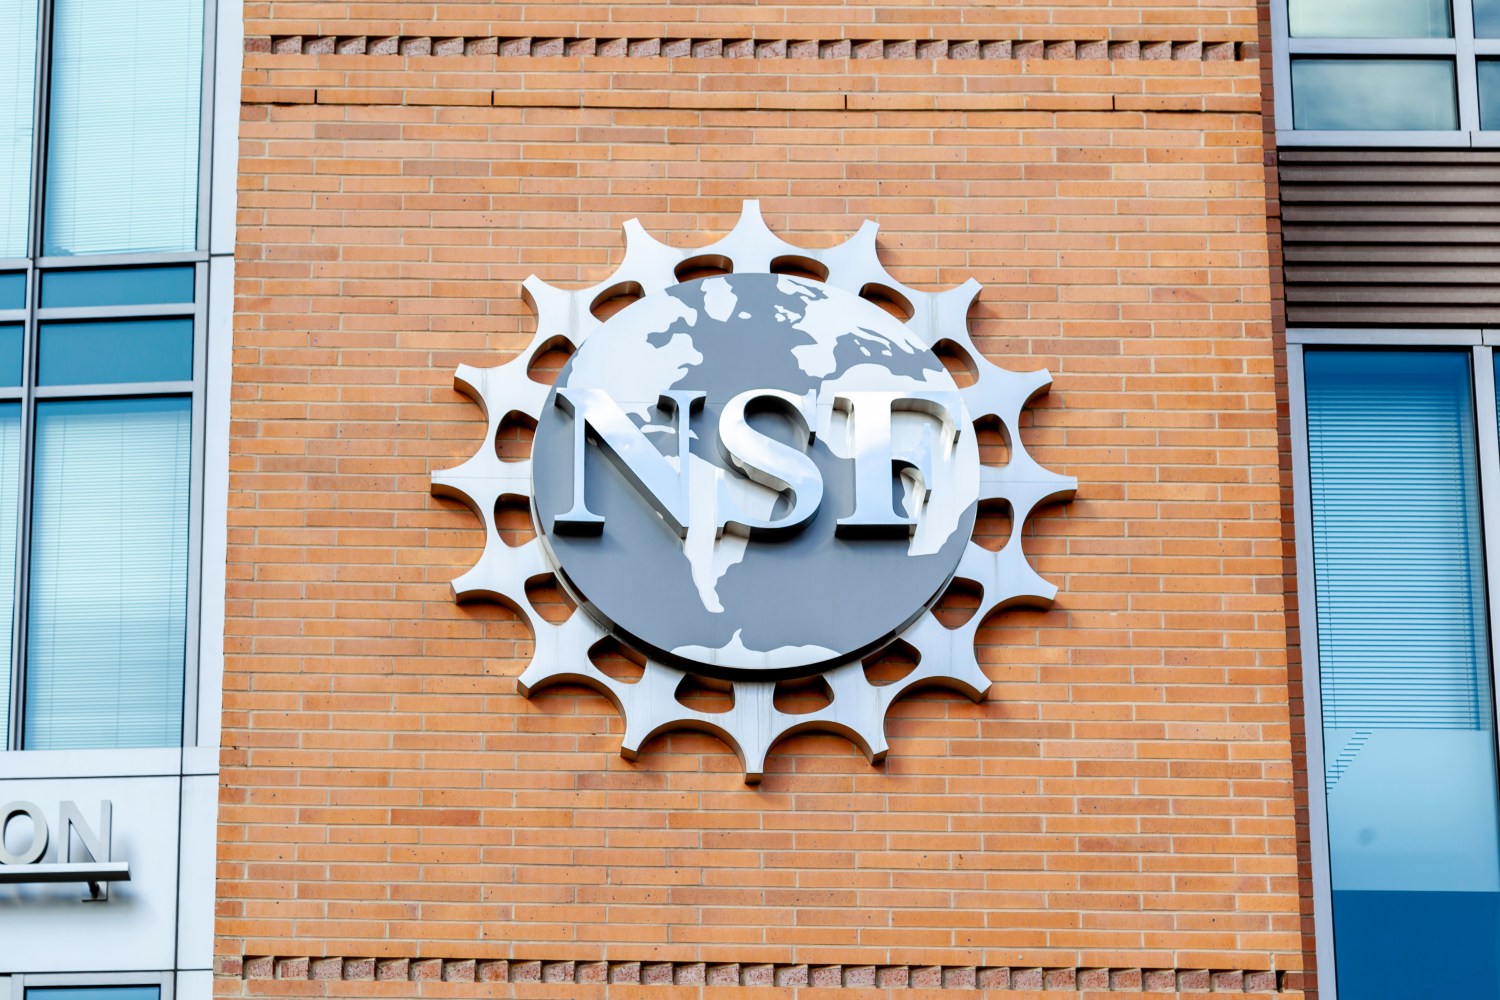 National Science Foundation's seal on building in Washington, D.C.